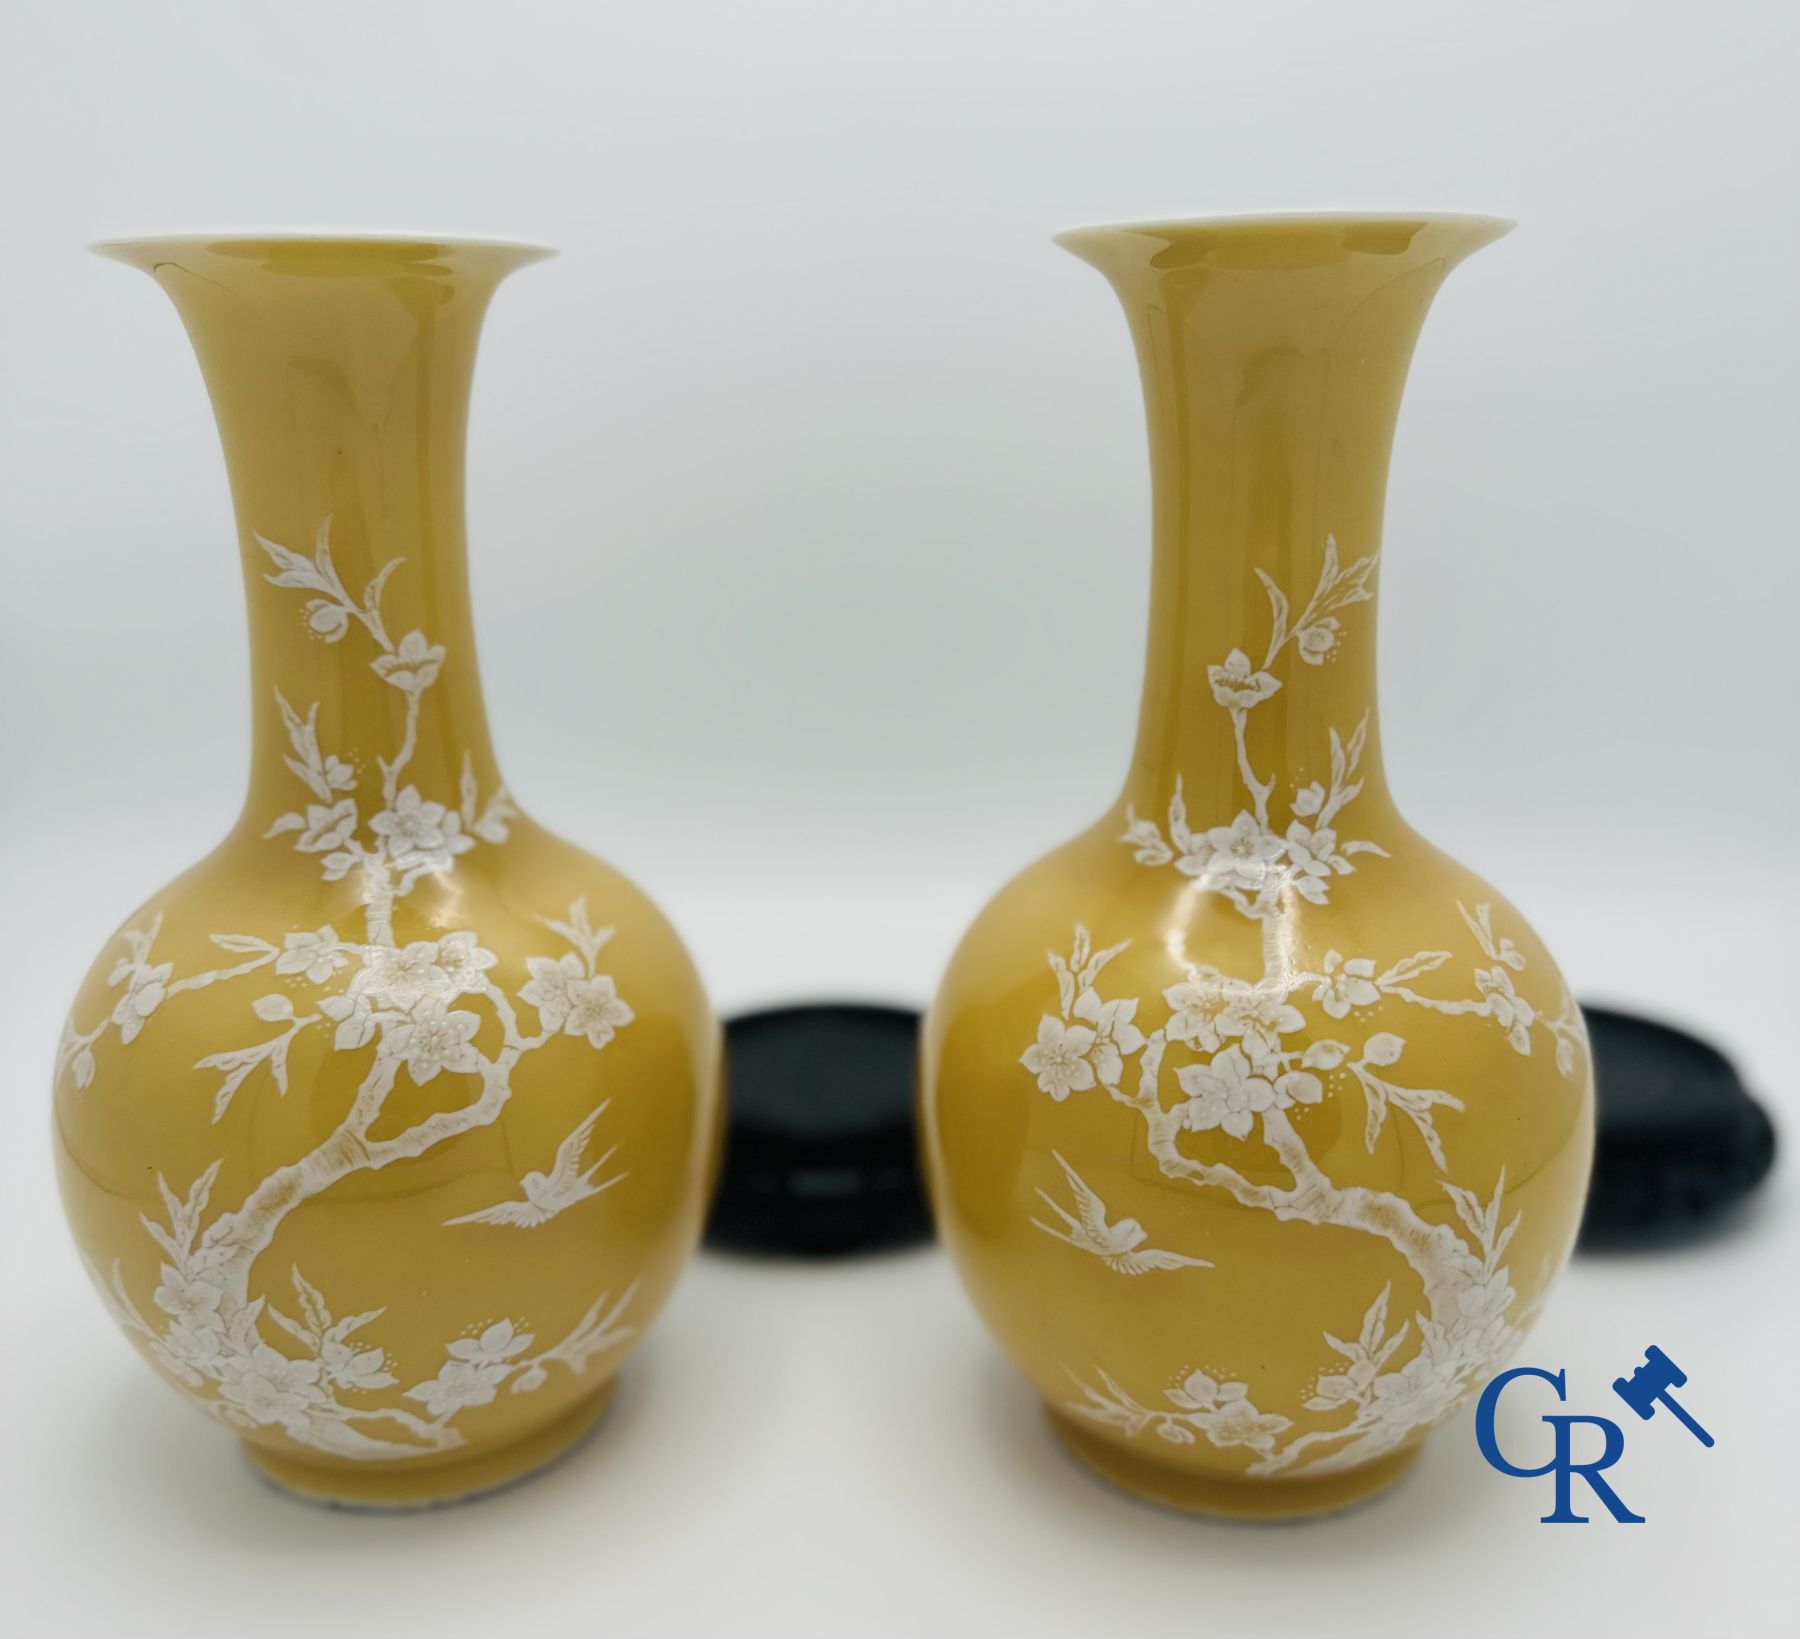 Chinese porcelain: Pair of Chinese vases with a floral decor on a yellow glazed surface. 20th centur - Image 3 of 6